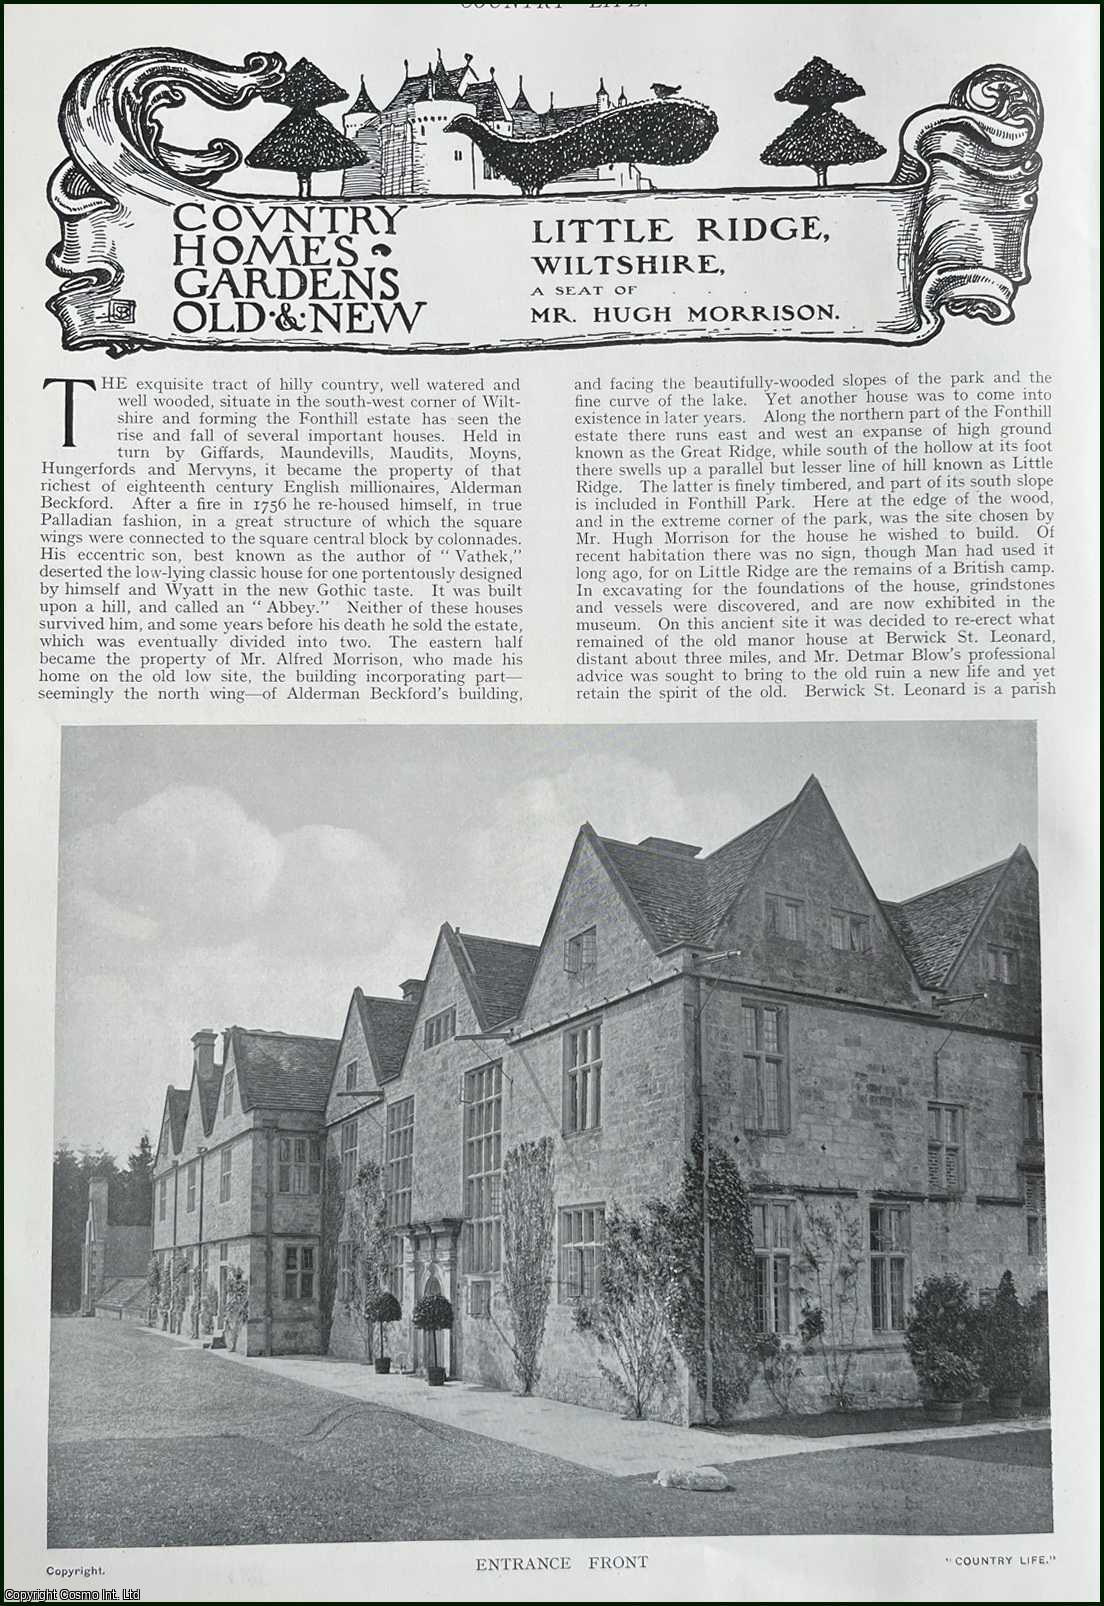 Country Life Magazine - Little Ridge, Wiltshire. A Seat of Mr. Hugh Morrison. Several pictures and accompanying text, removed from an original issue of Country Life Magazine, 1912.